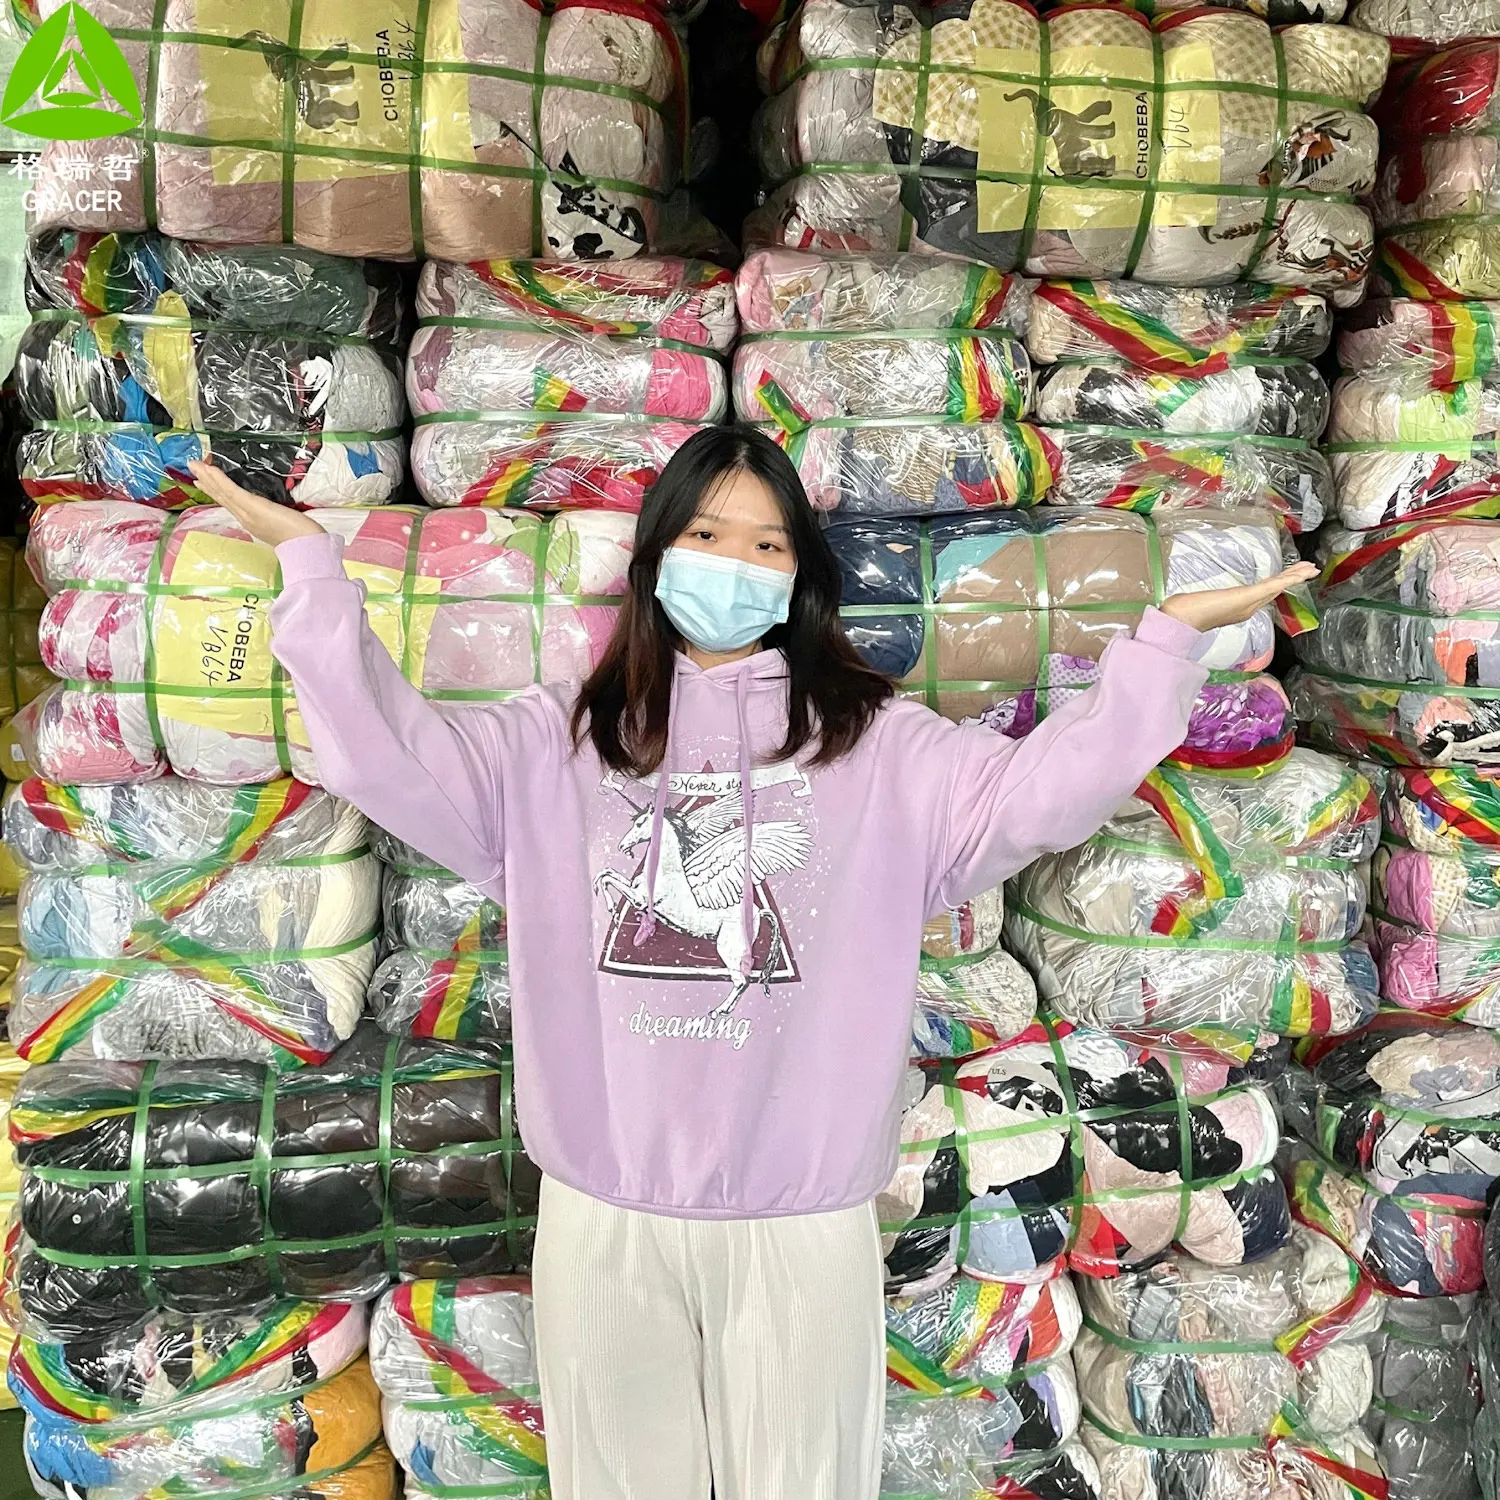 Fashion Quality Branded Bale Korean Bales Mixed Used Clothing 45Kg Bea Code,Mixed Package Korean Used Clothes Bales